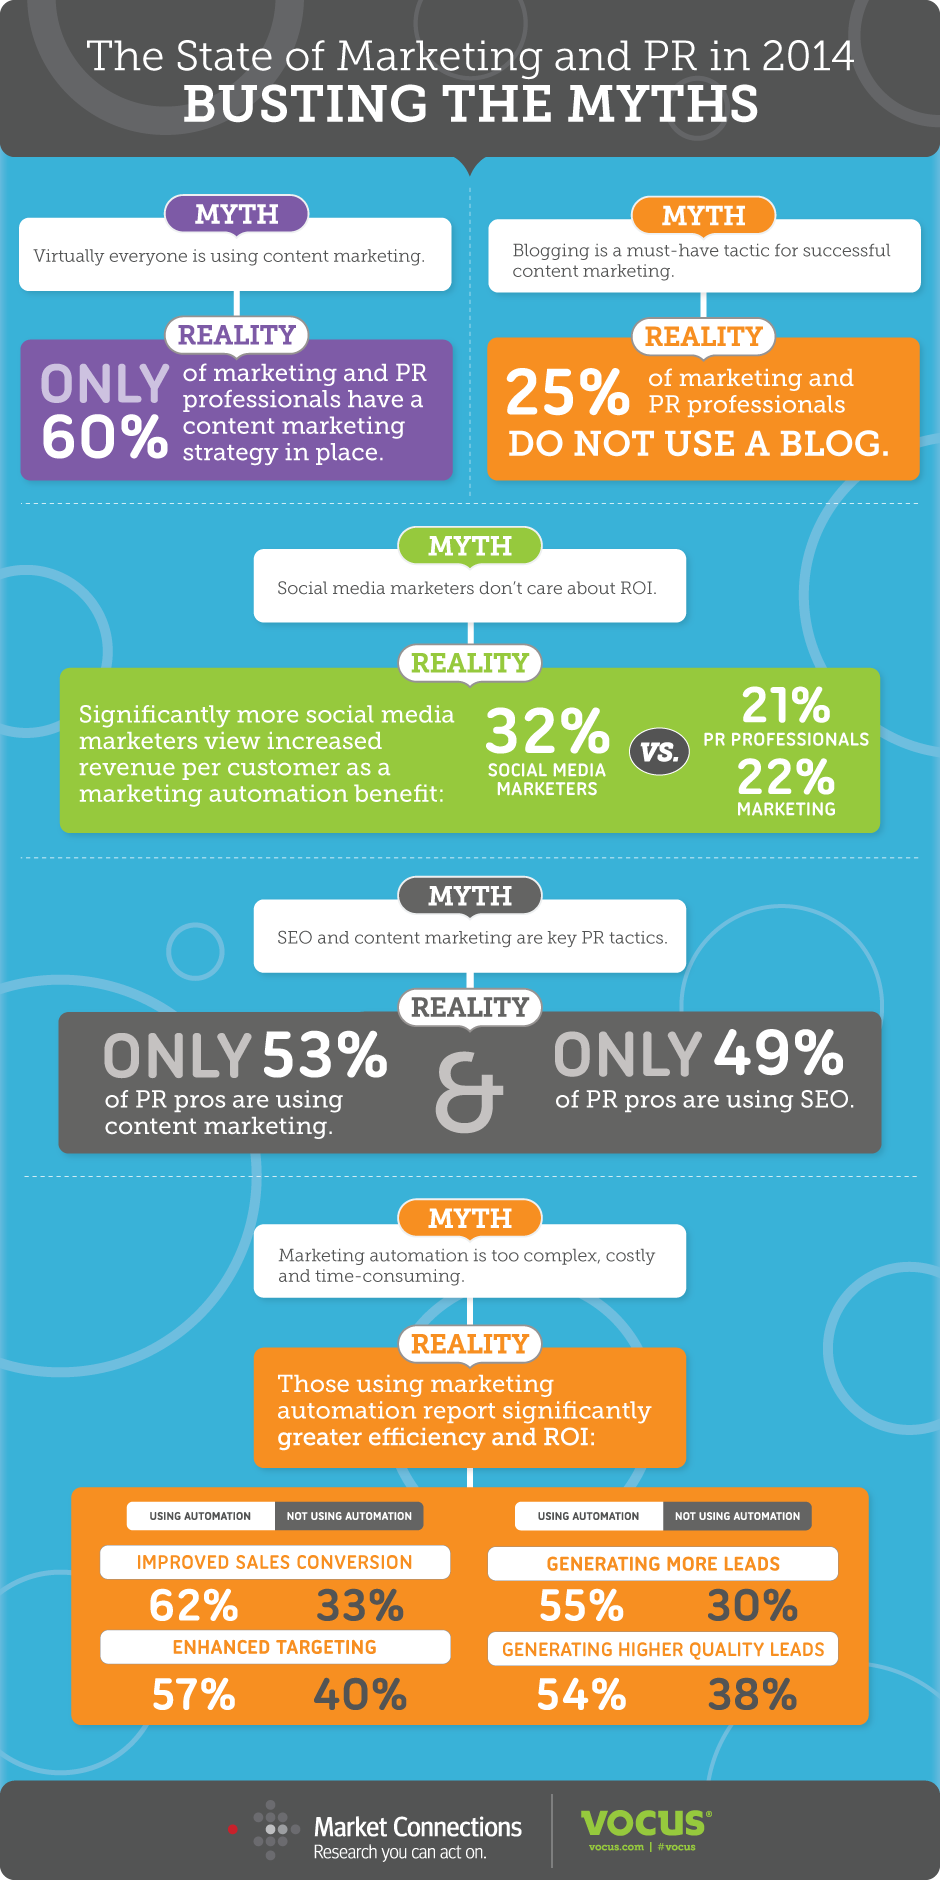 The State of #Marketing and PR in 2014: Busting The Myths - #infographic